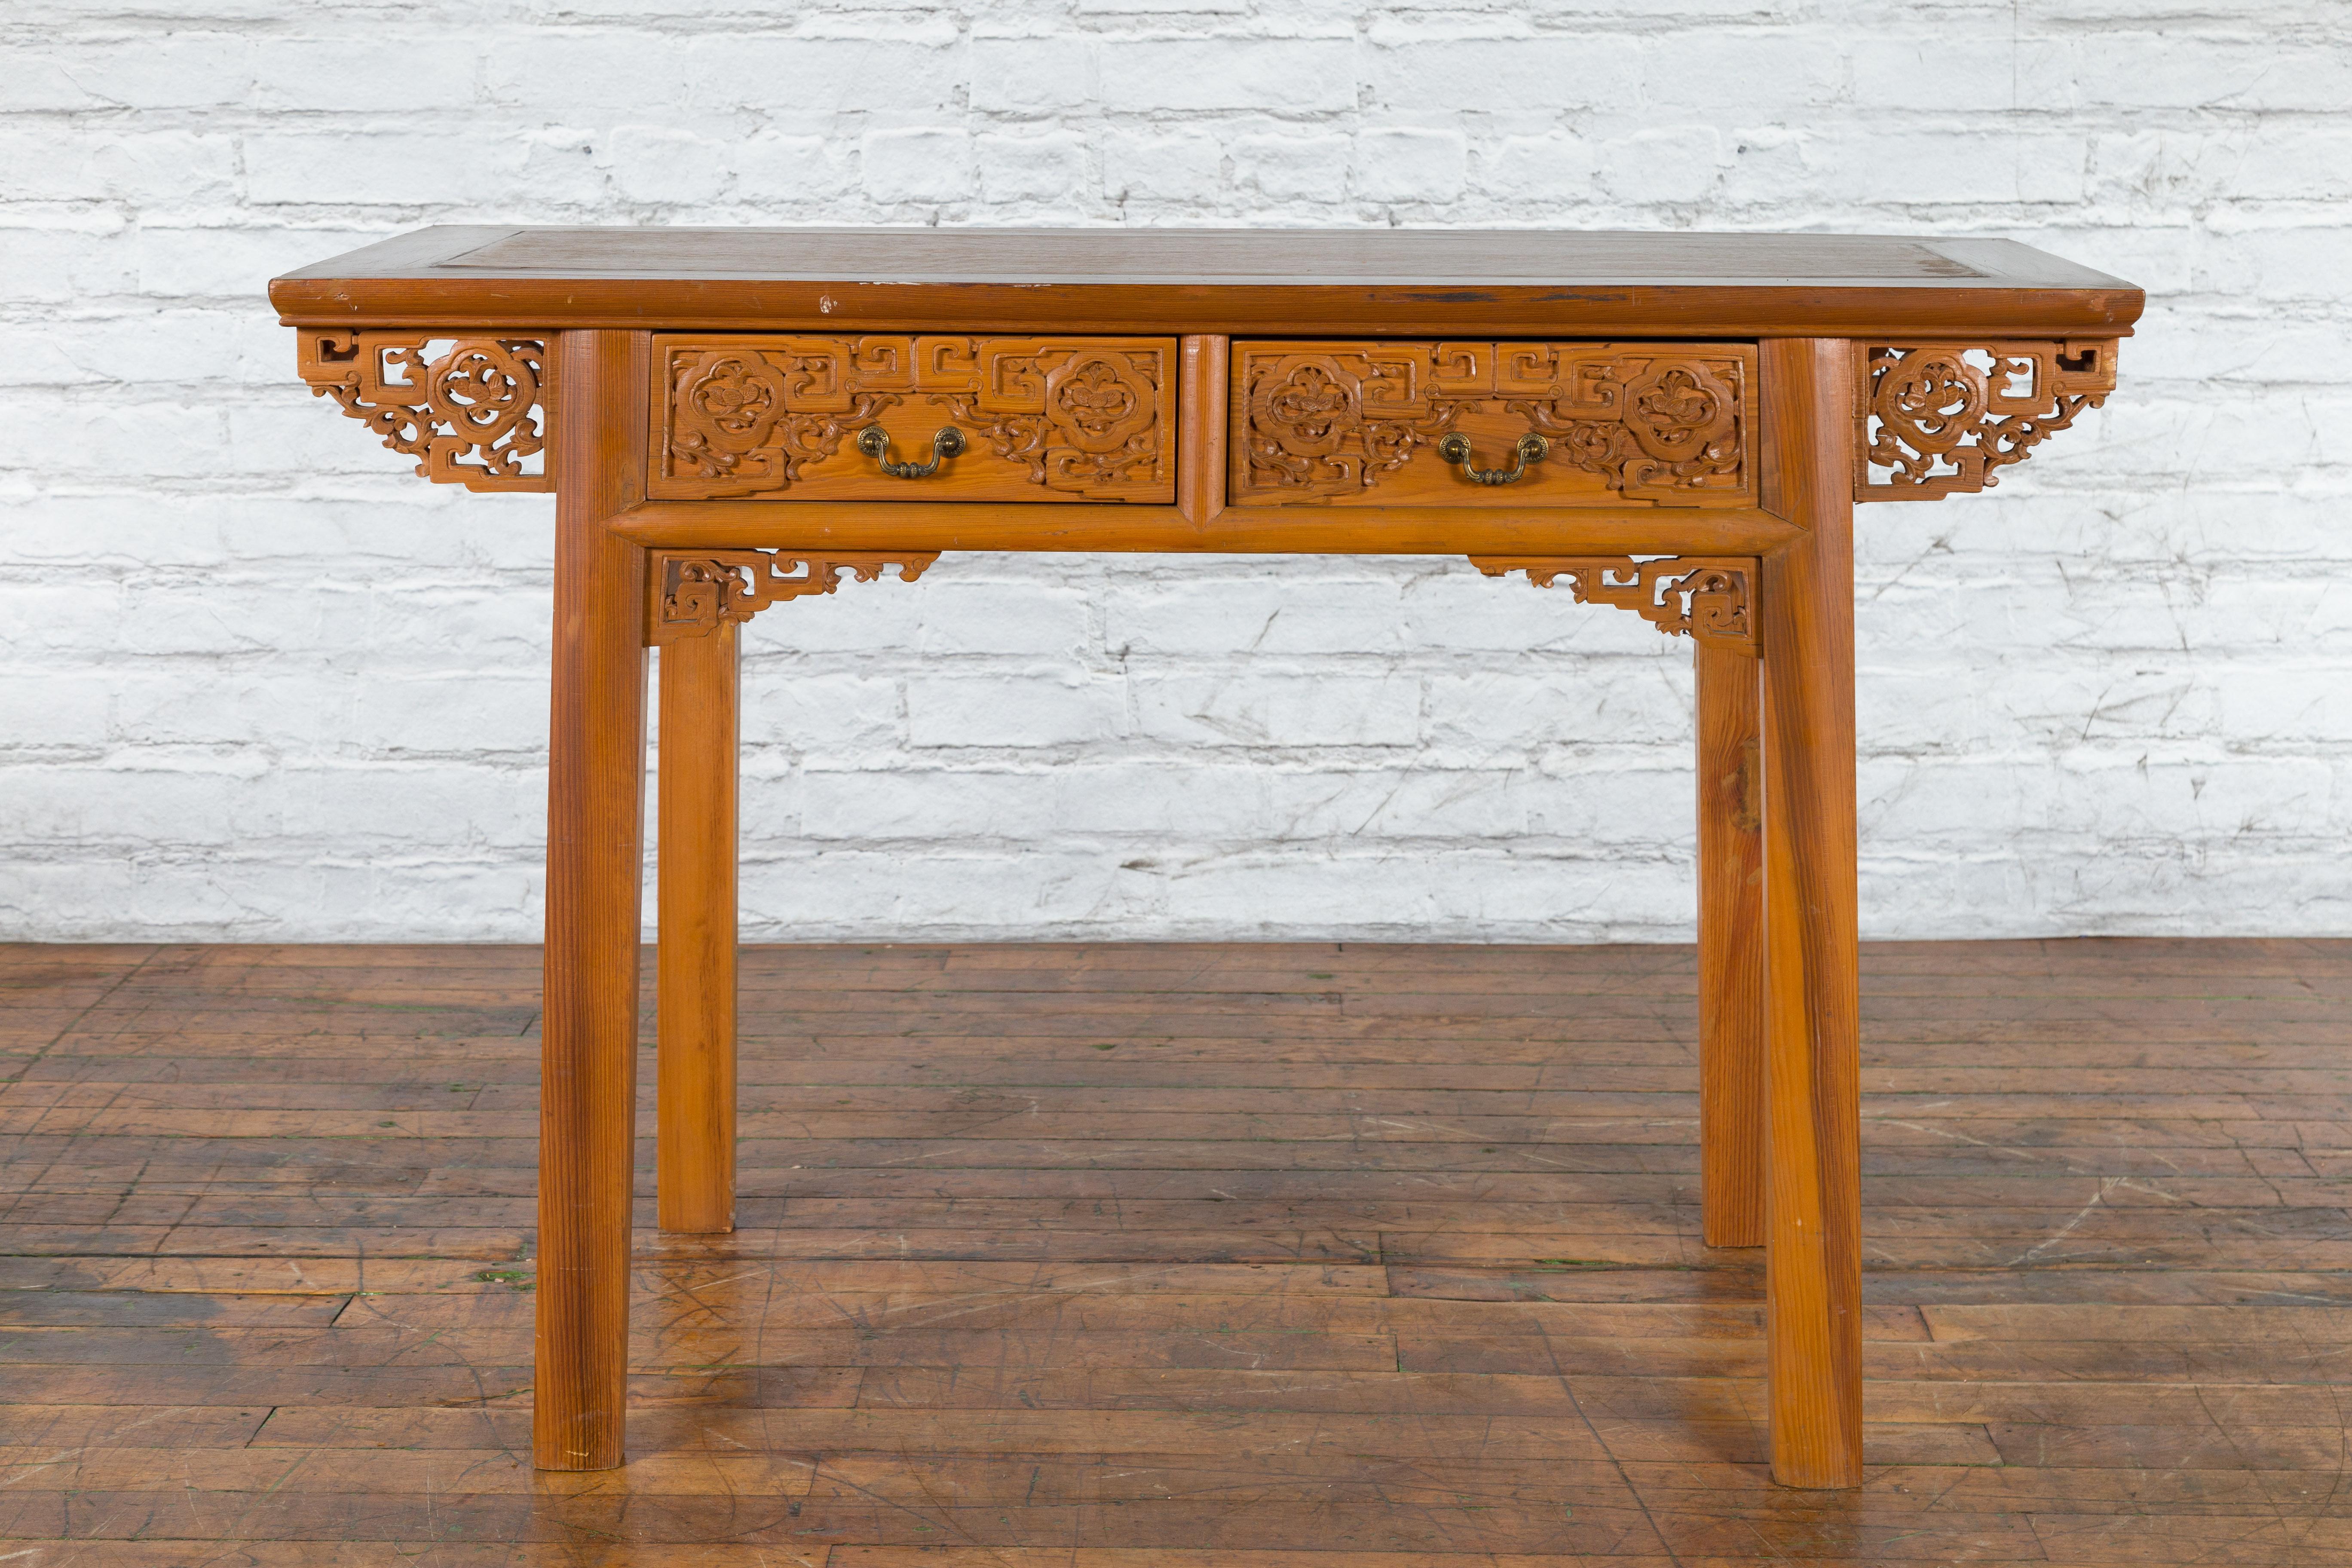 A Chinese Qing Dynasty period wooden desk from the 19th century with two carved drawers and fretwork motifs. Created in China during the Qing Dynasty in the 19th century, this exquisite wooden desk features a rectangular two-toned top with central